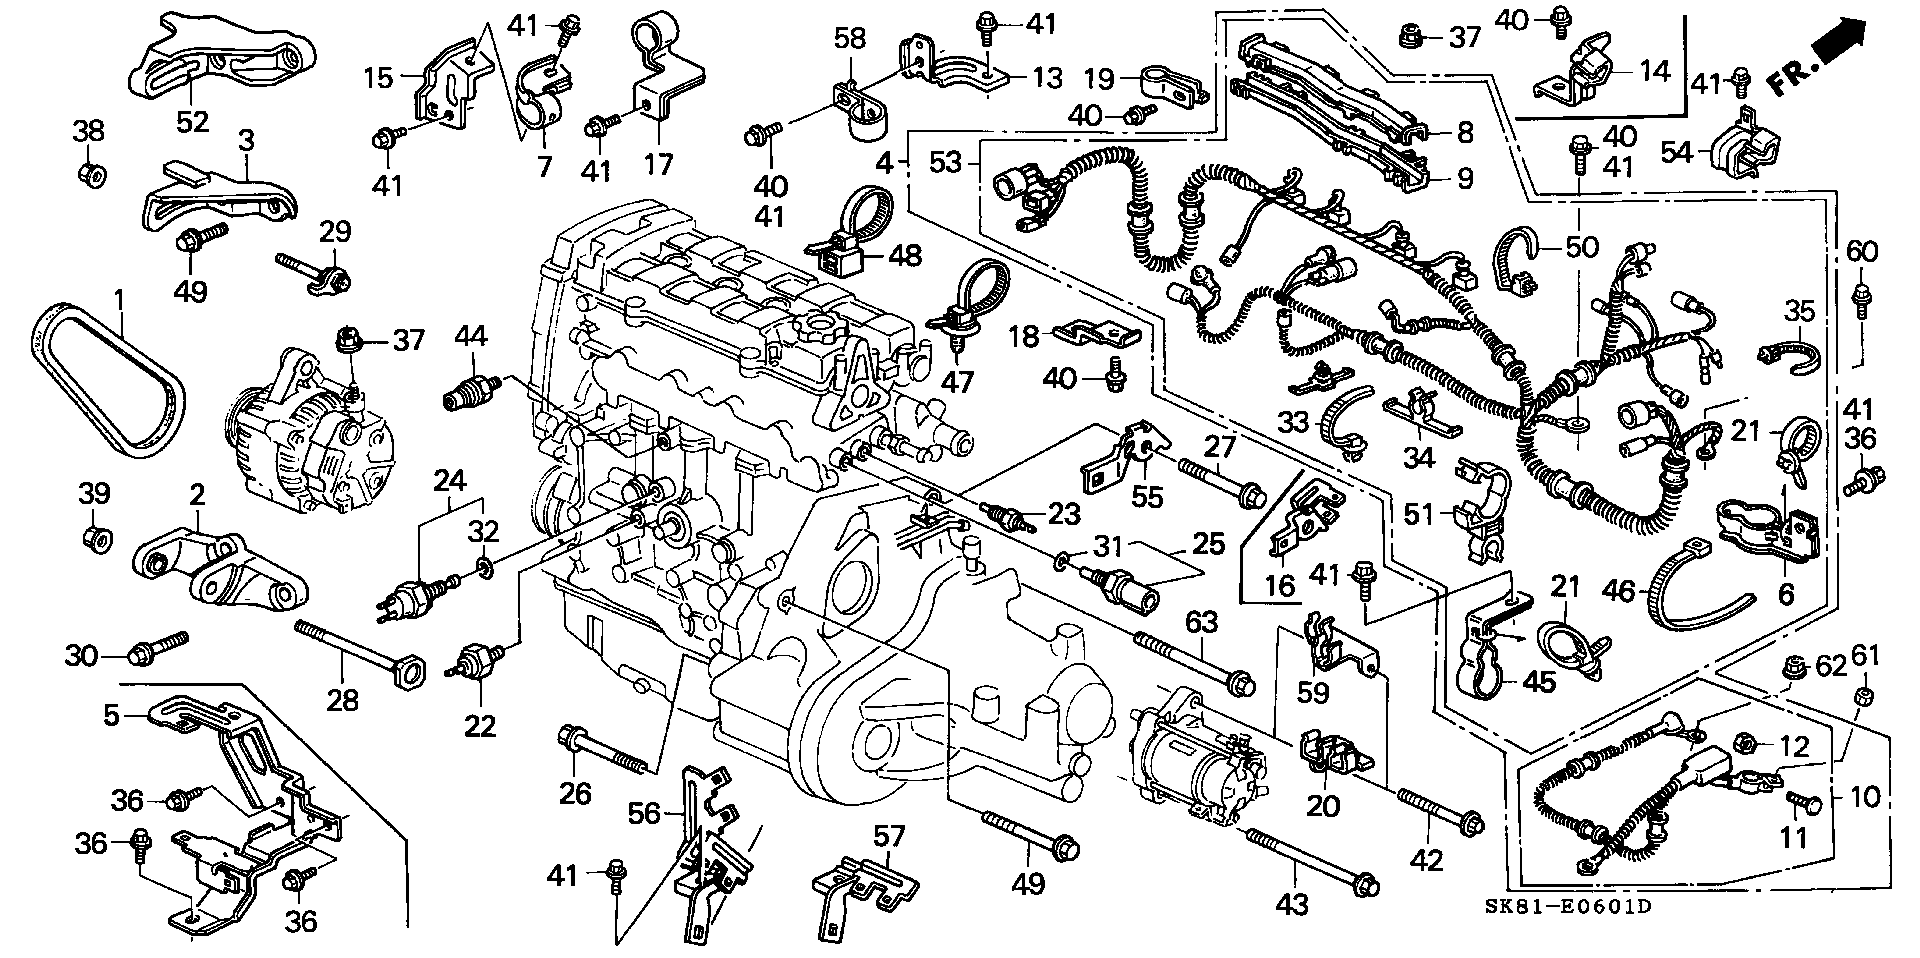 ENGINE WIRE HARNESS/ CLAMP(DOHC)